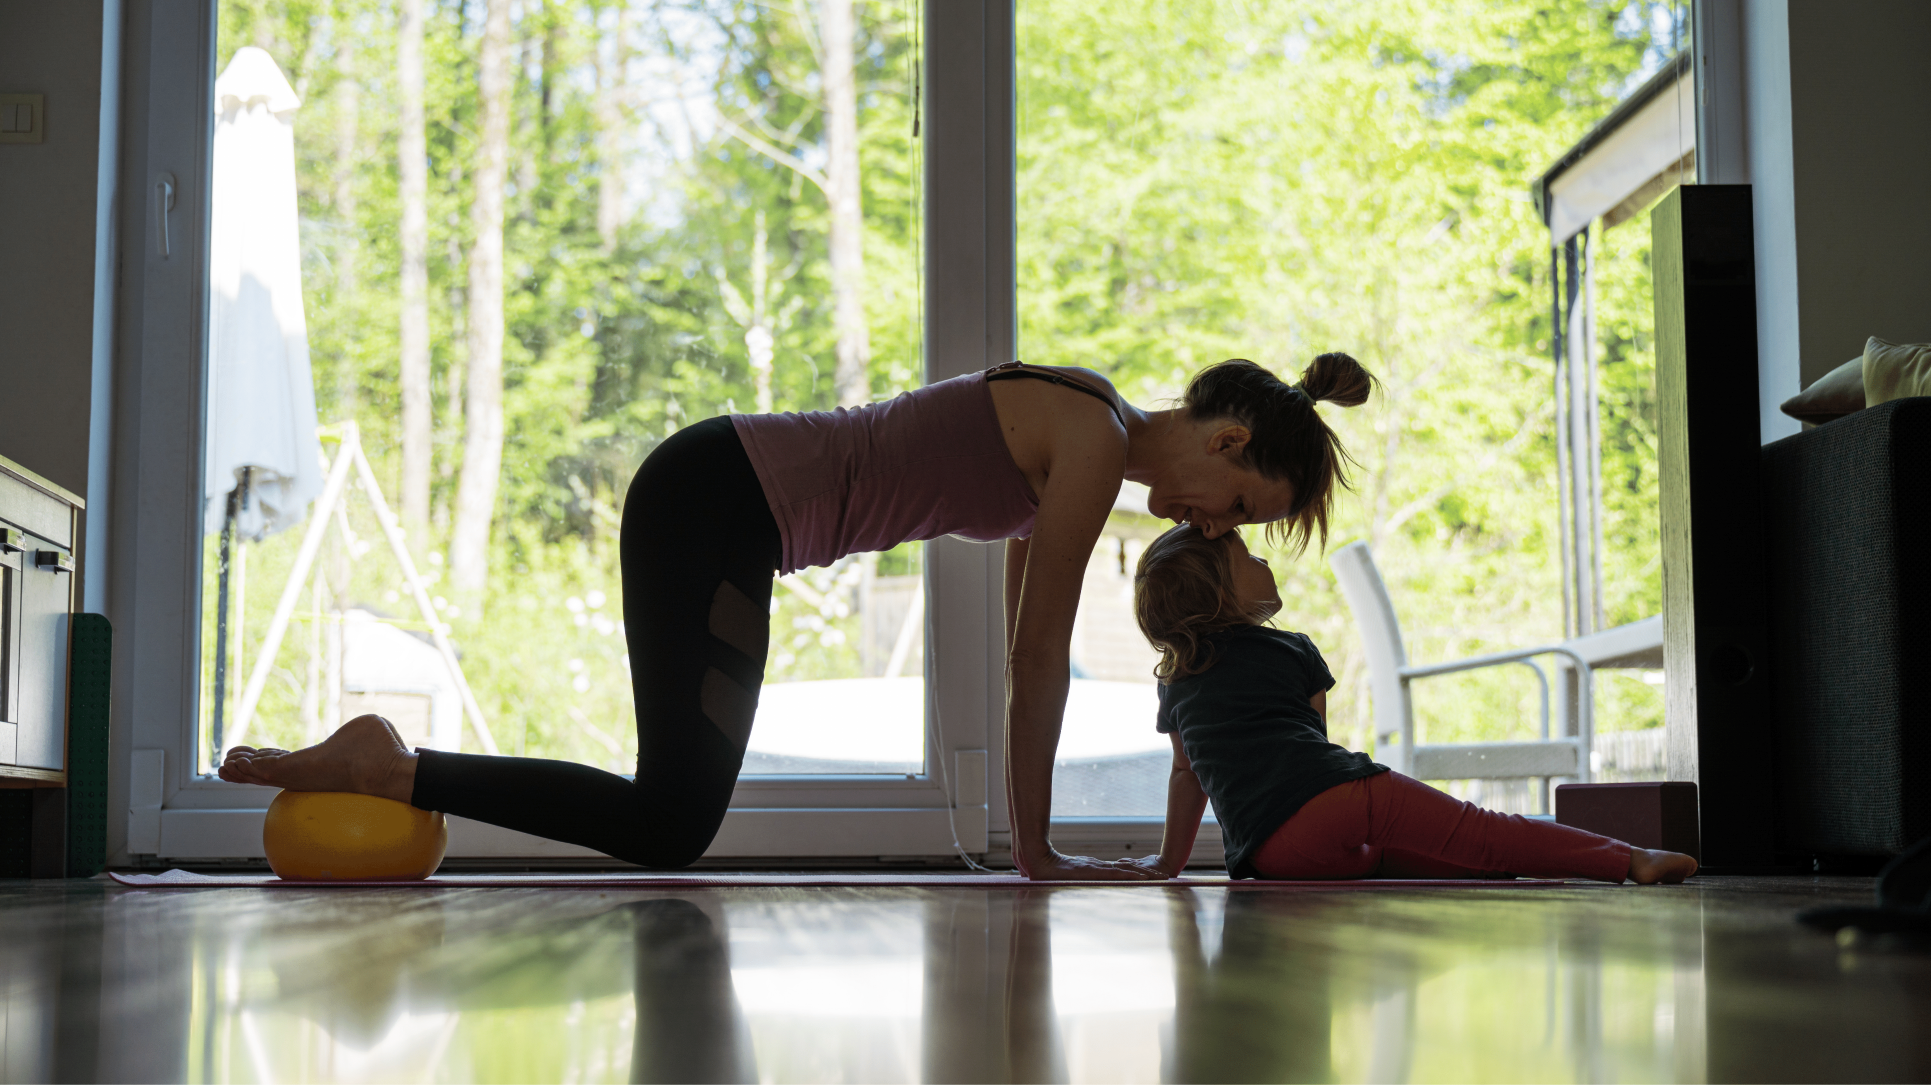 Pilates Instructor Academy - 5 Reasons Why Moms and Expecting Moms Should Become Pilates Instructors